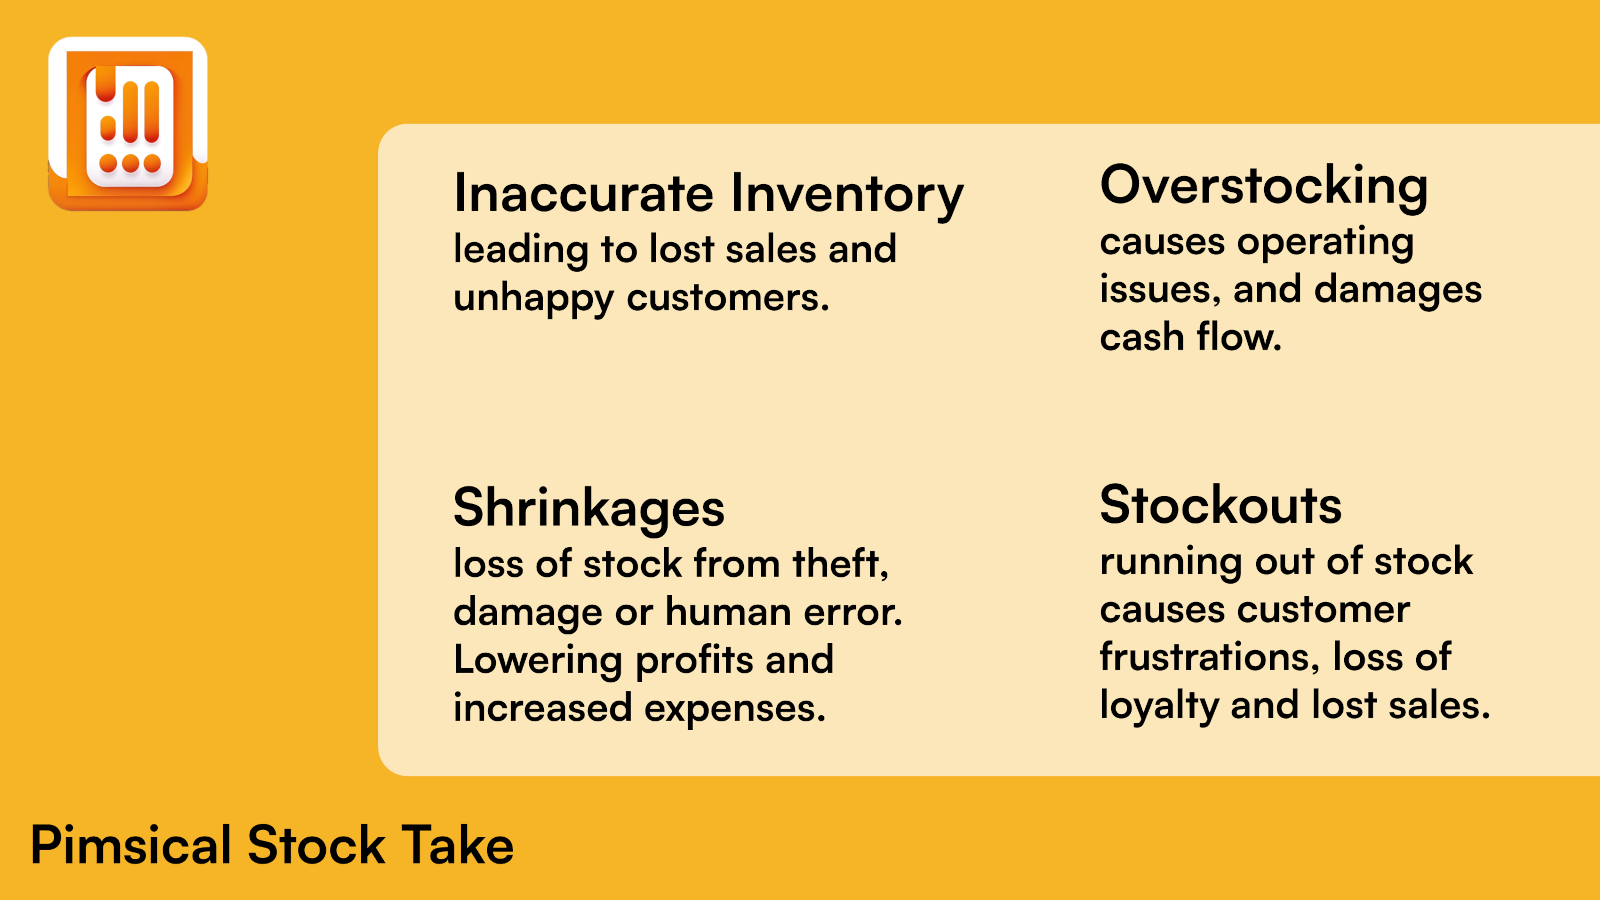 Inaccurate Inventory leads to loss of sales & unhappy customers